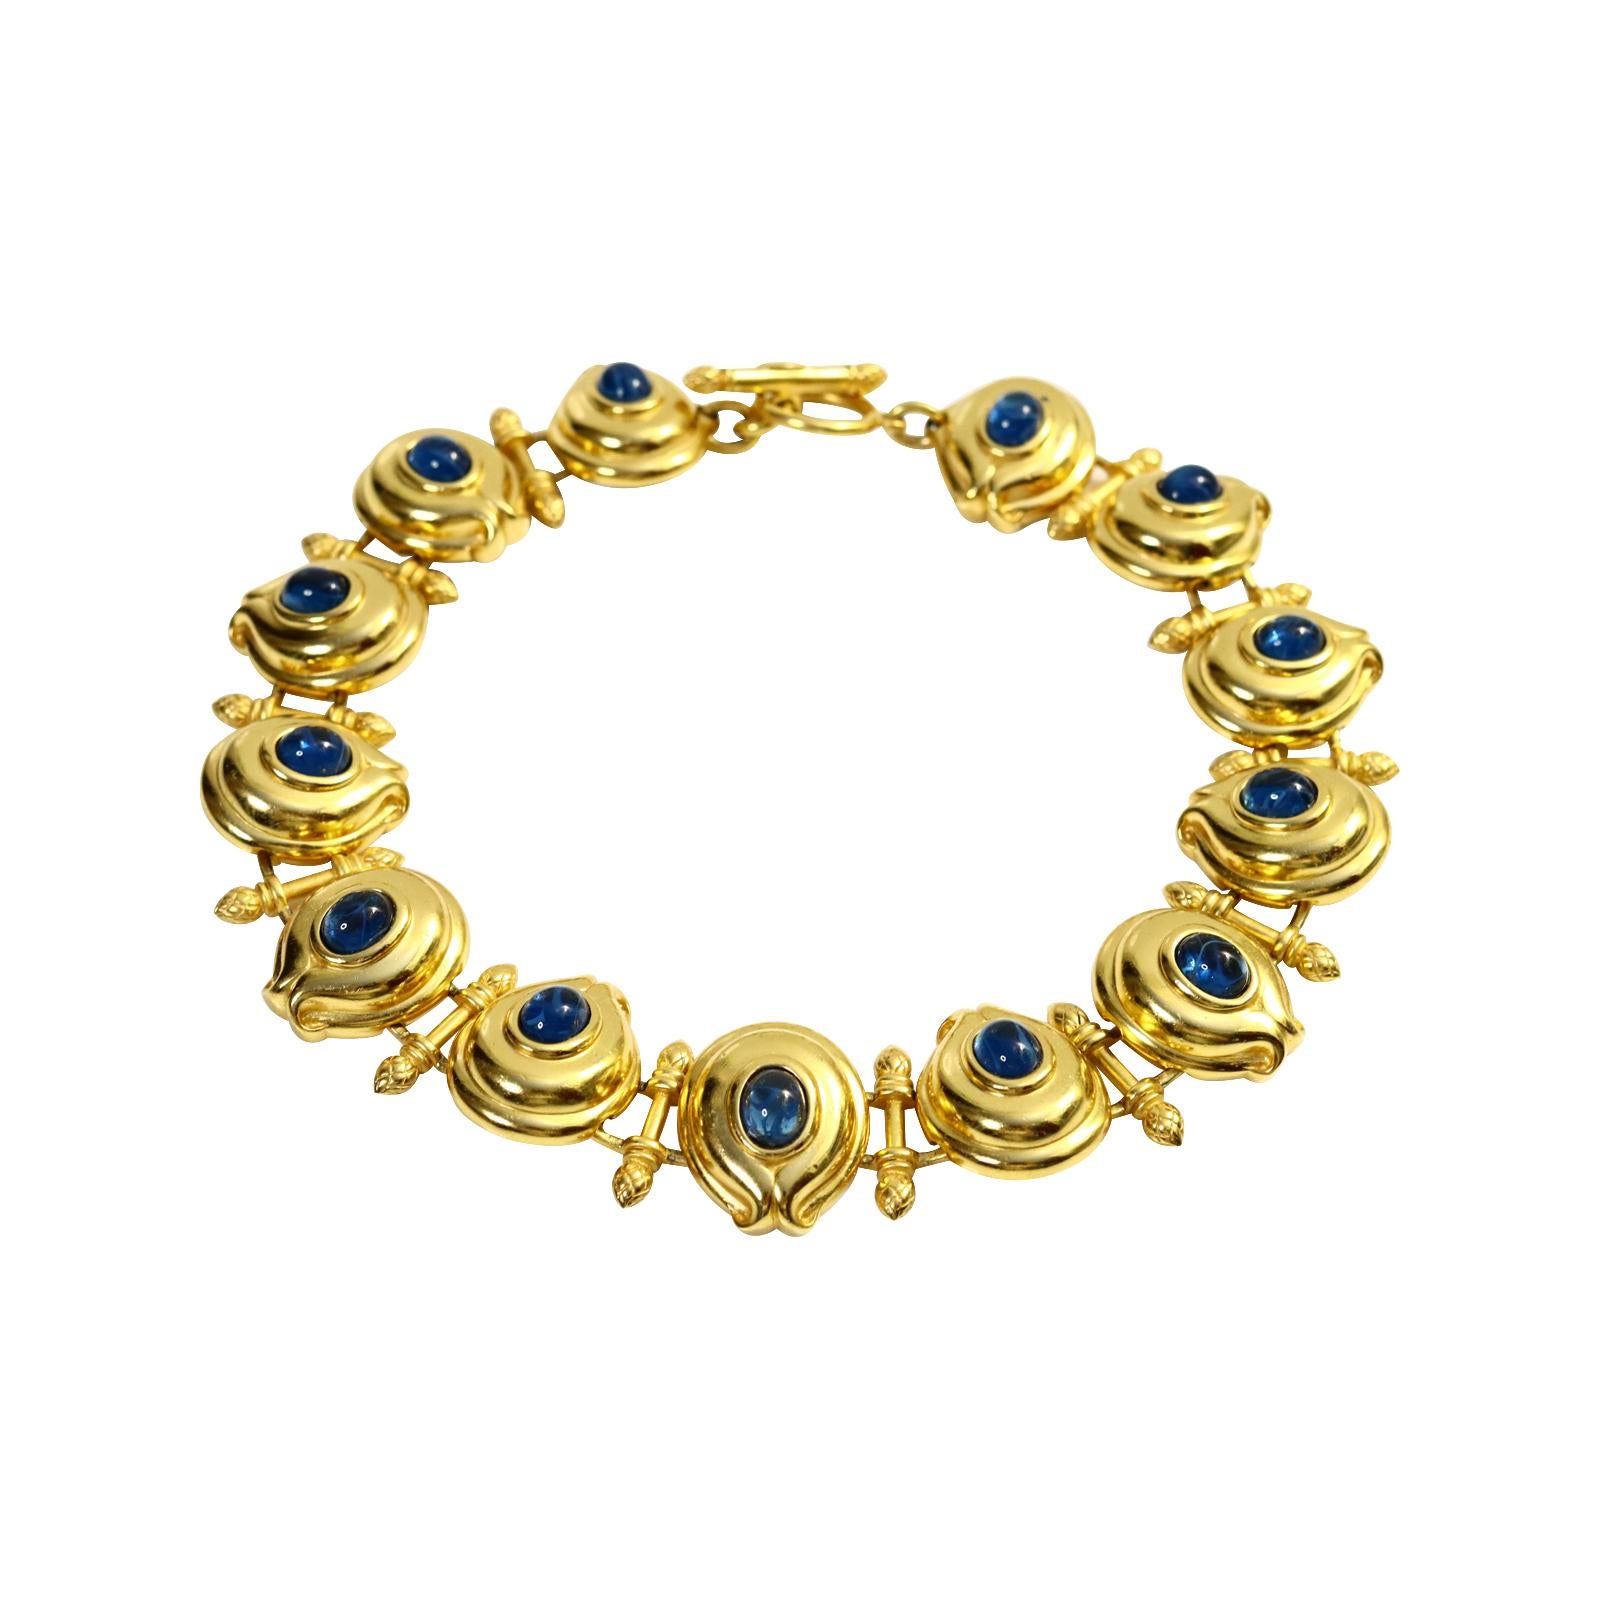 Modern Vintage Fendi Gold Tone and Blue Cabochon Toggle Necklace Circa 1980s For Sale